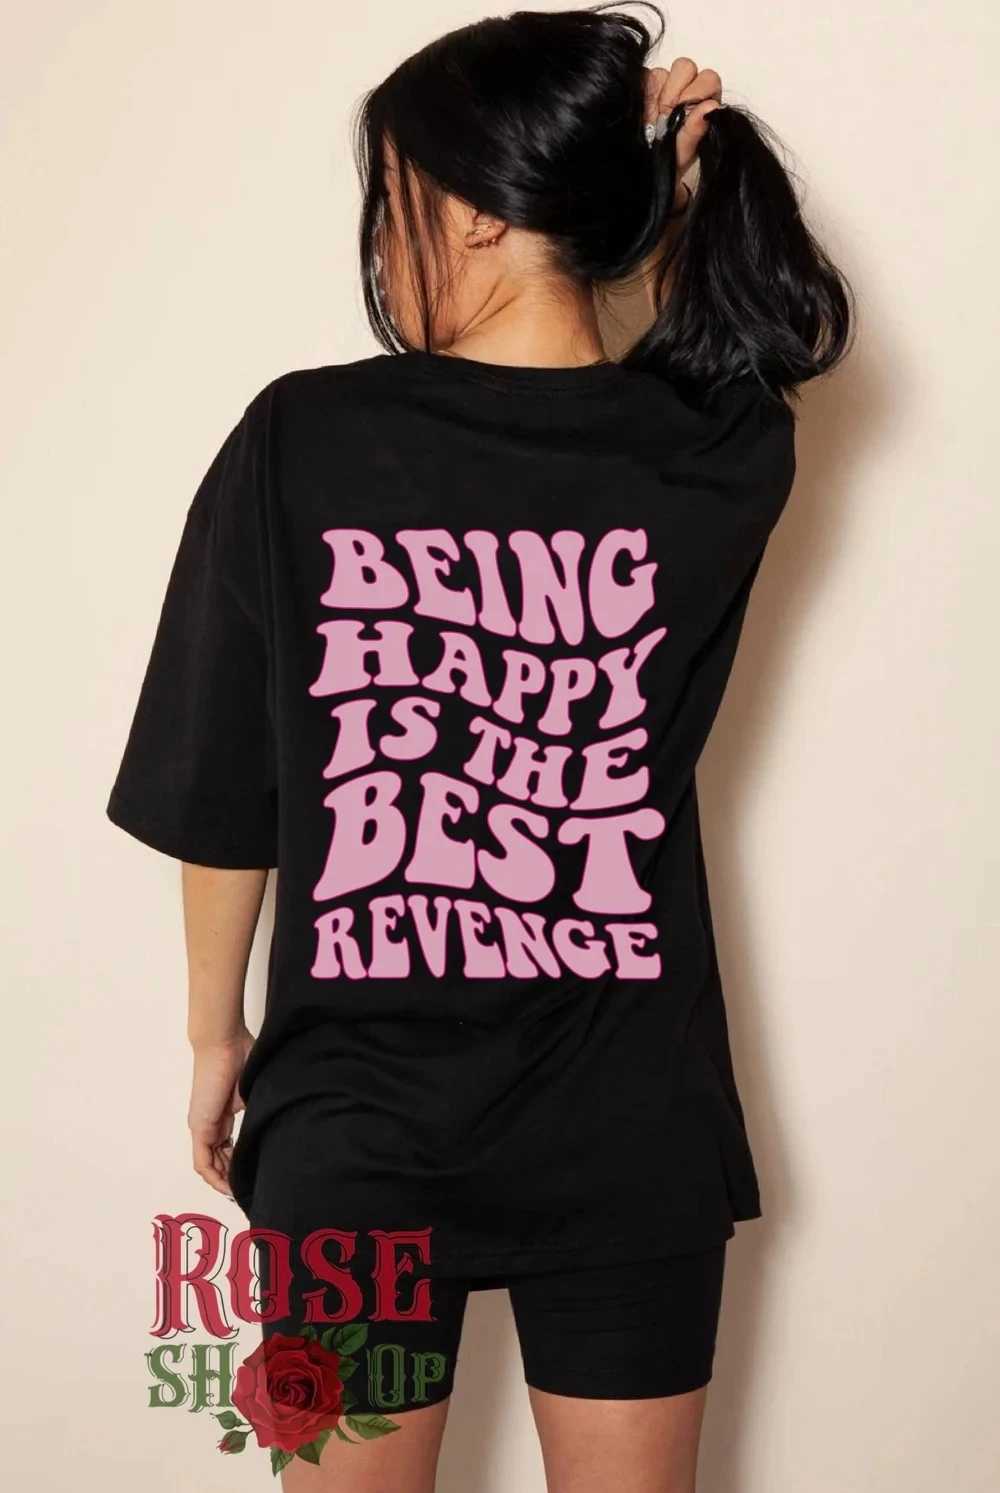 

Being Happy Is The Best Revenge T-Shirts Colorful Trendy Positive Sayings Shirts Women Fashion Casual Aesthetic Top